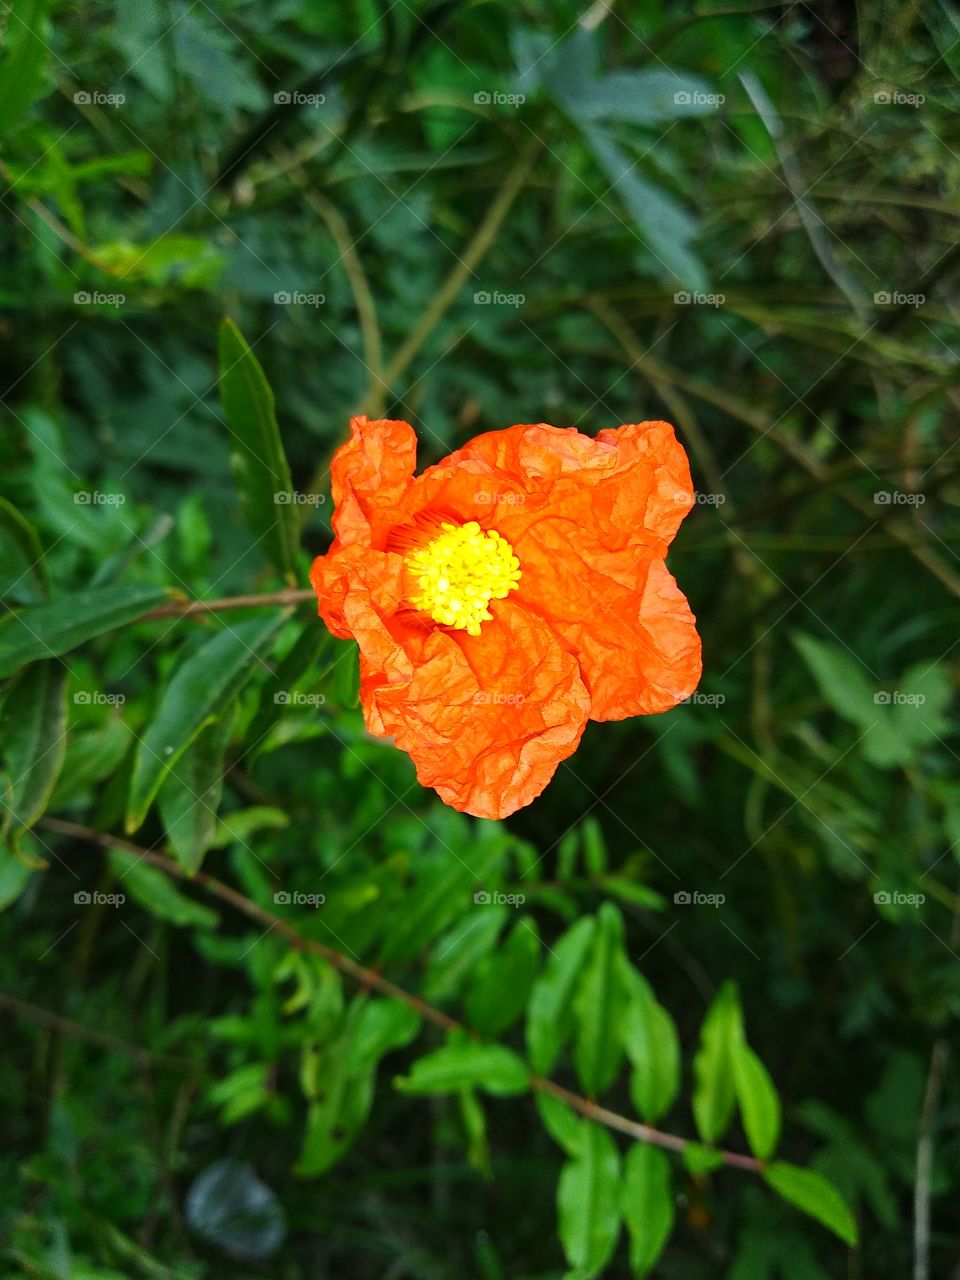 beautiful pomegranate flower with orange colour in the garden in nature.